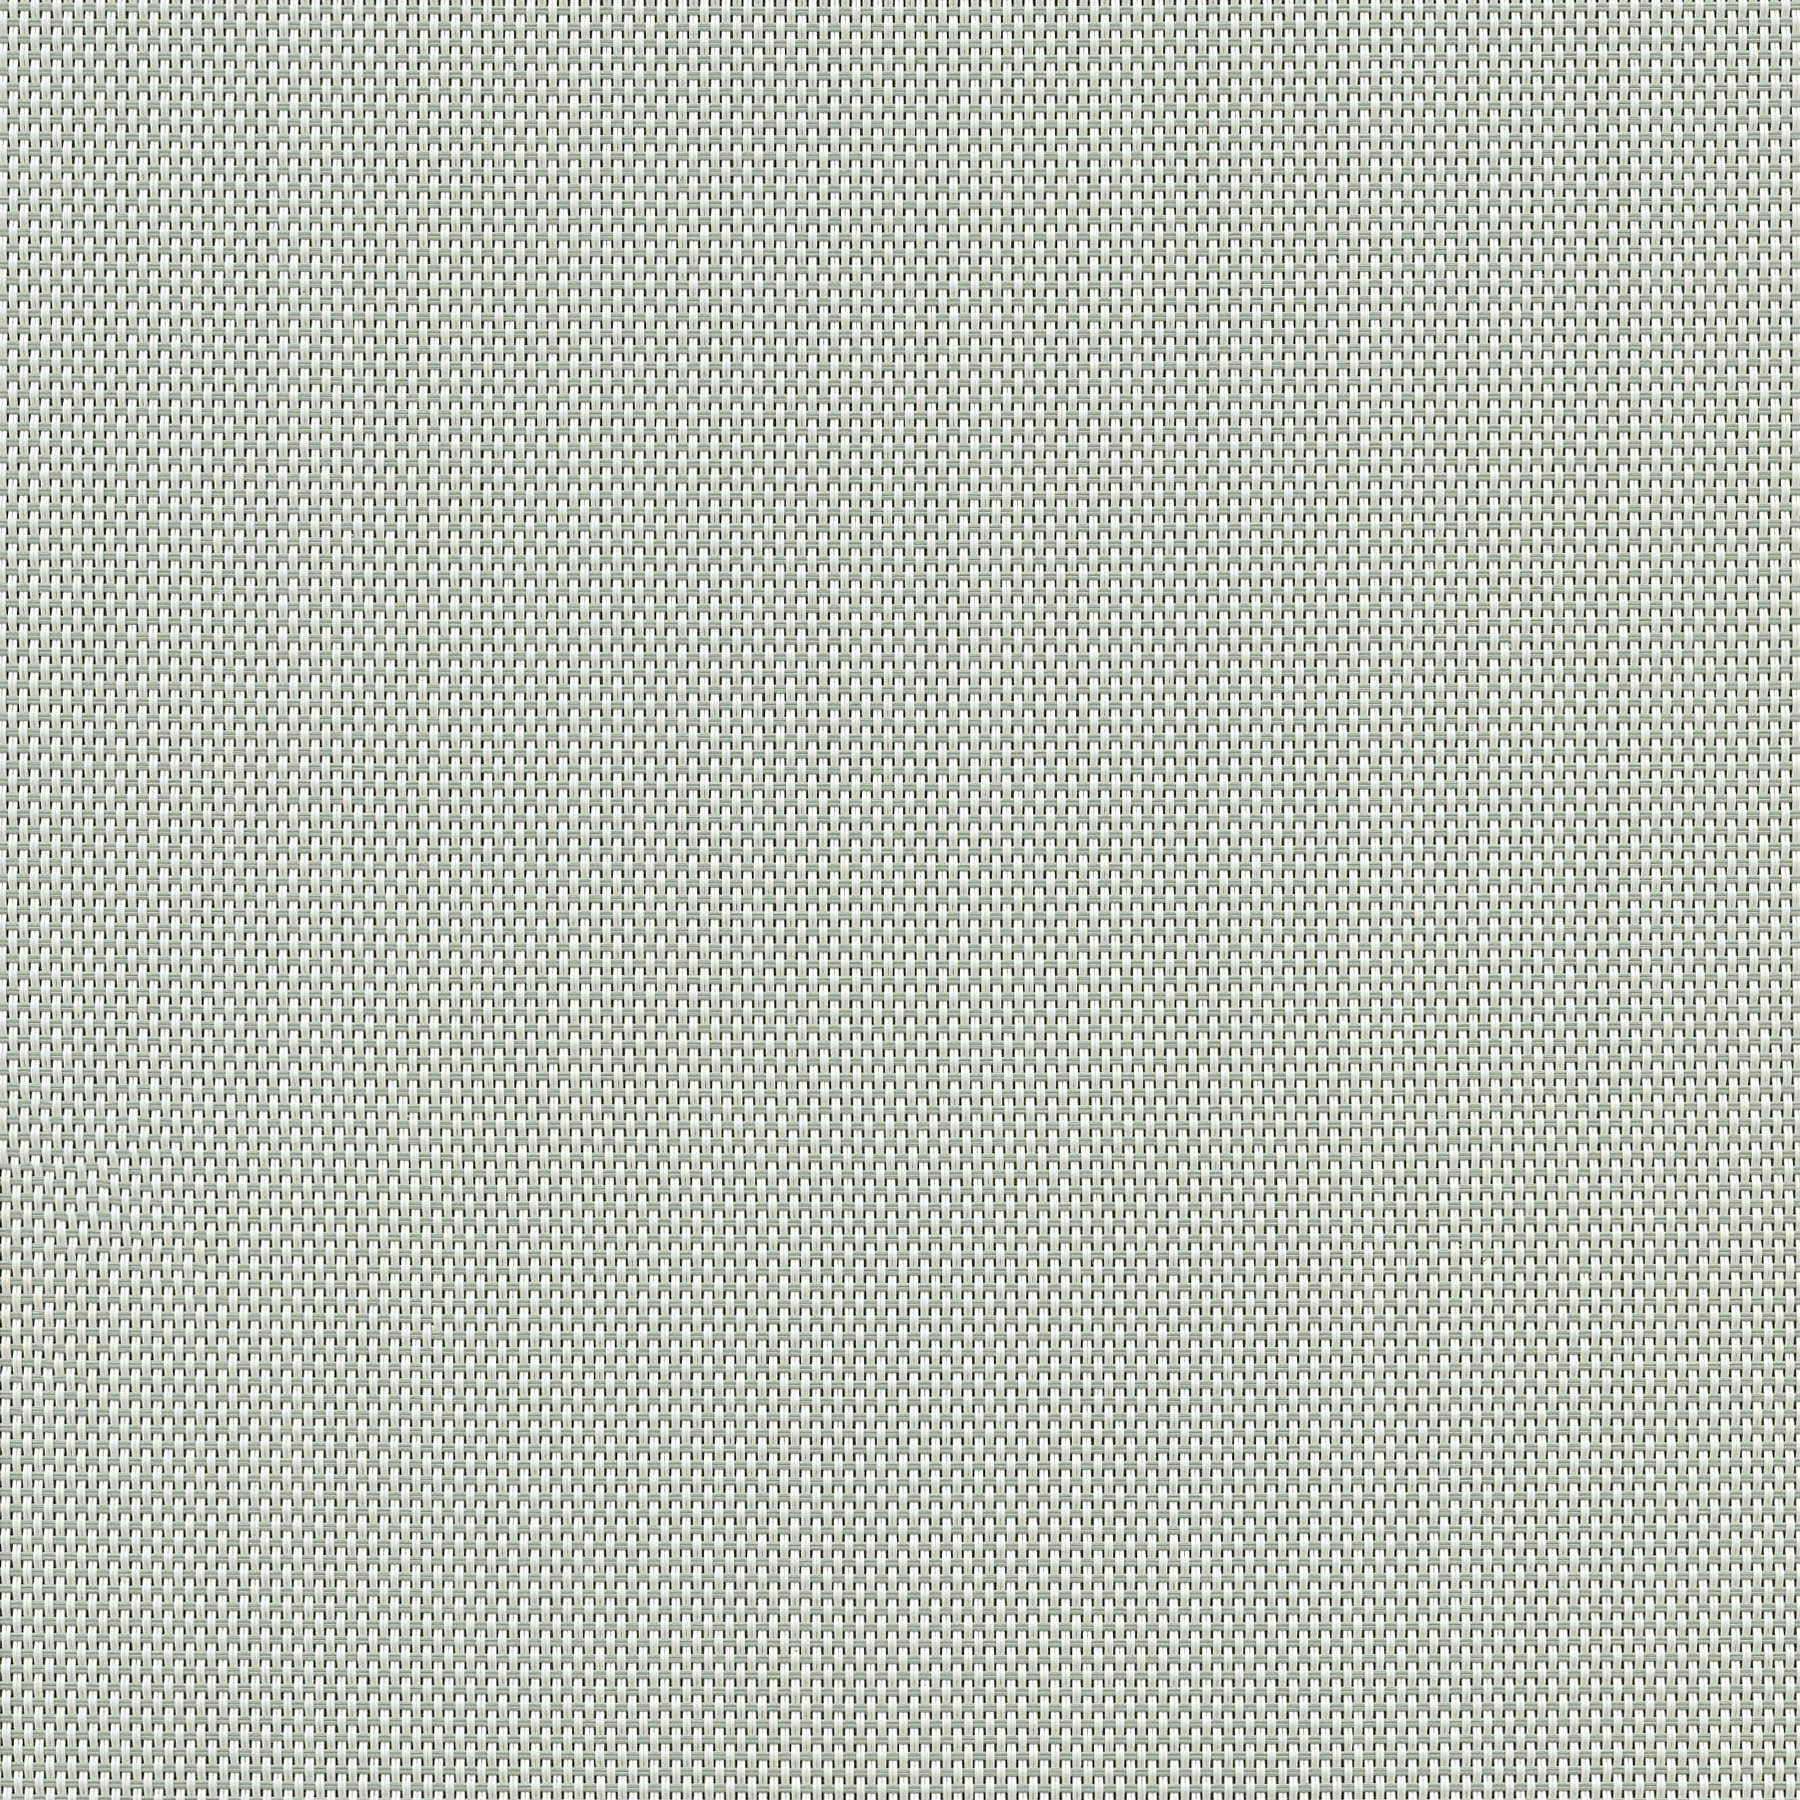 Altex - Fabric - SHEERWEAVE 2410 - Oyster-Pearl Grey - 41P14